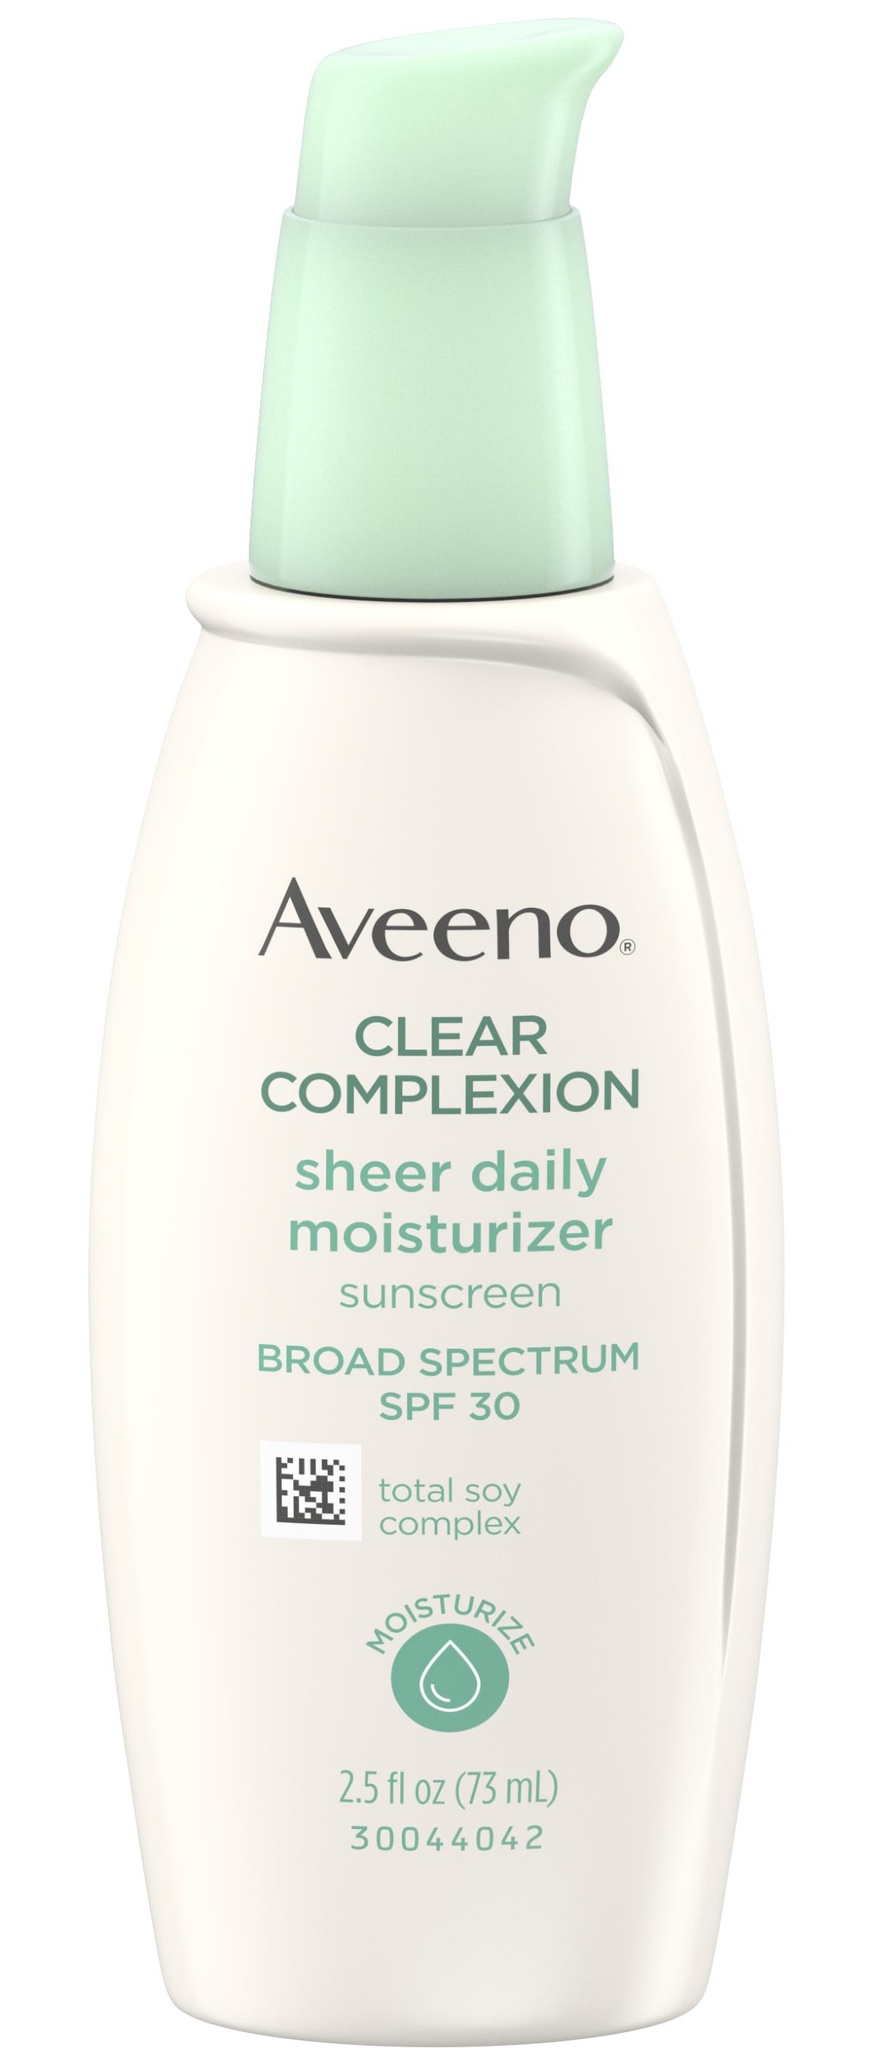 Aveeno Clear Complexion Sheer Daily Moisturizer